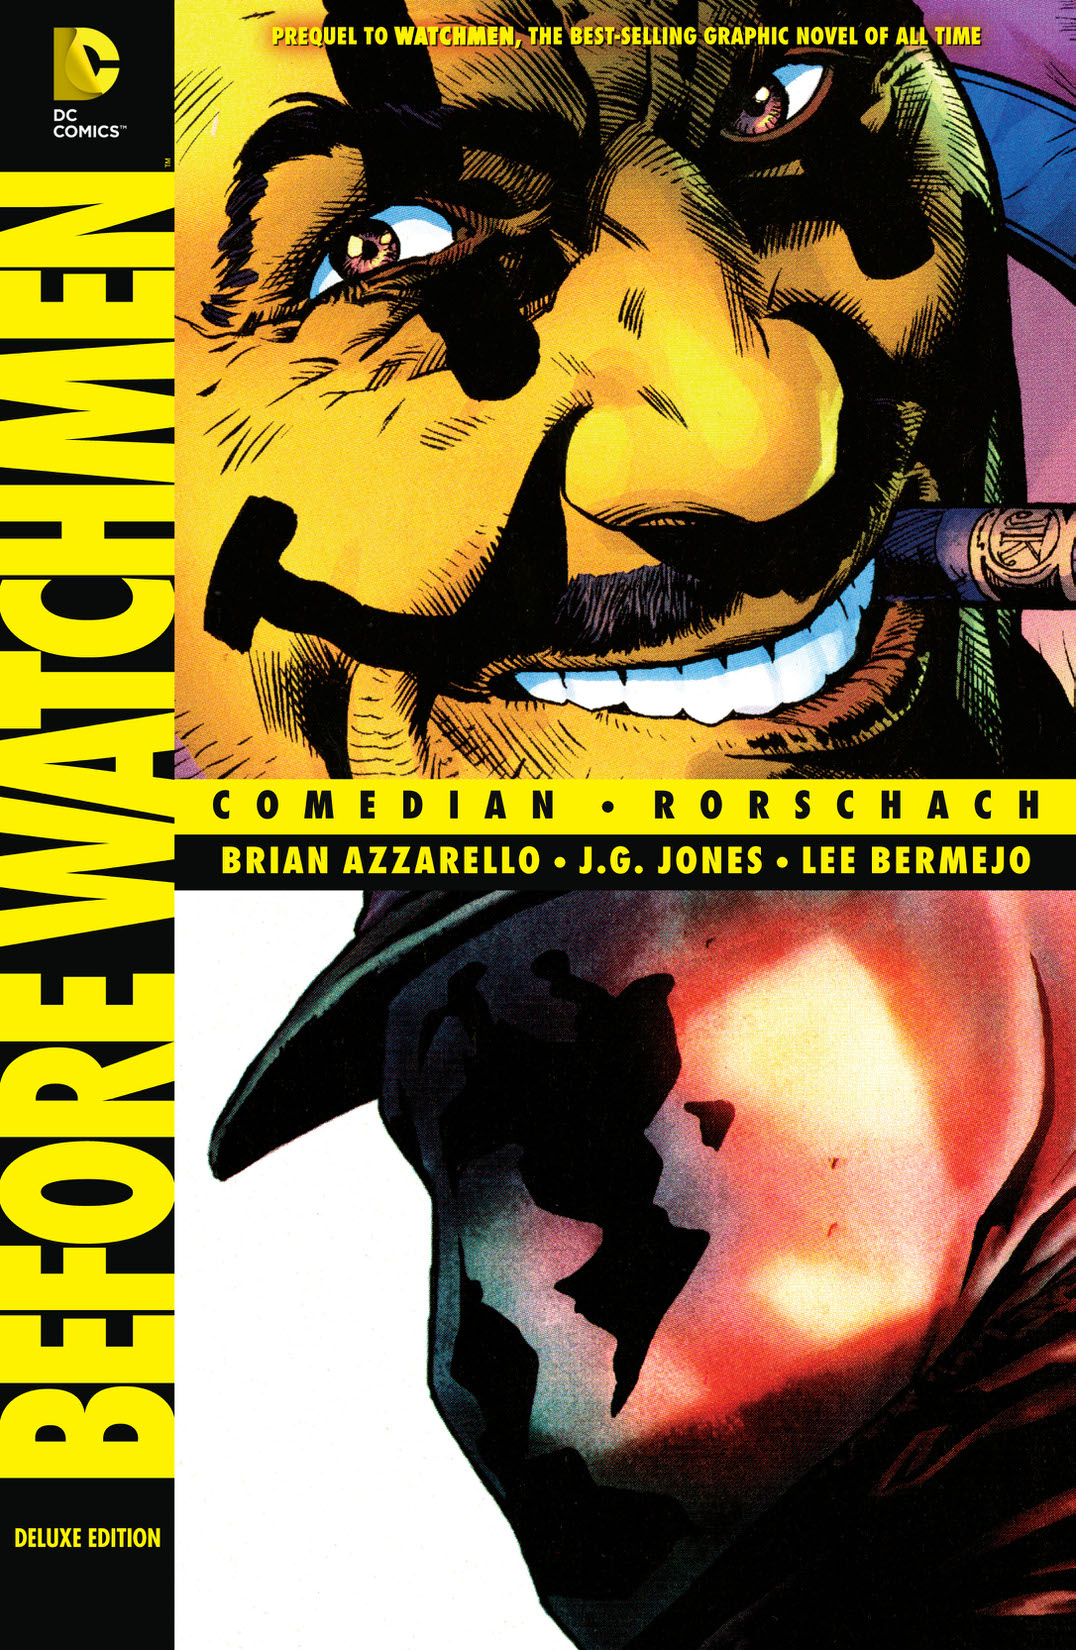 Before Watchmen: Comedian/Rorschach preview images